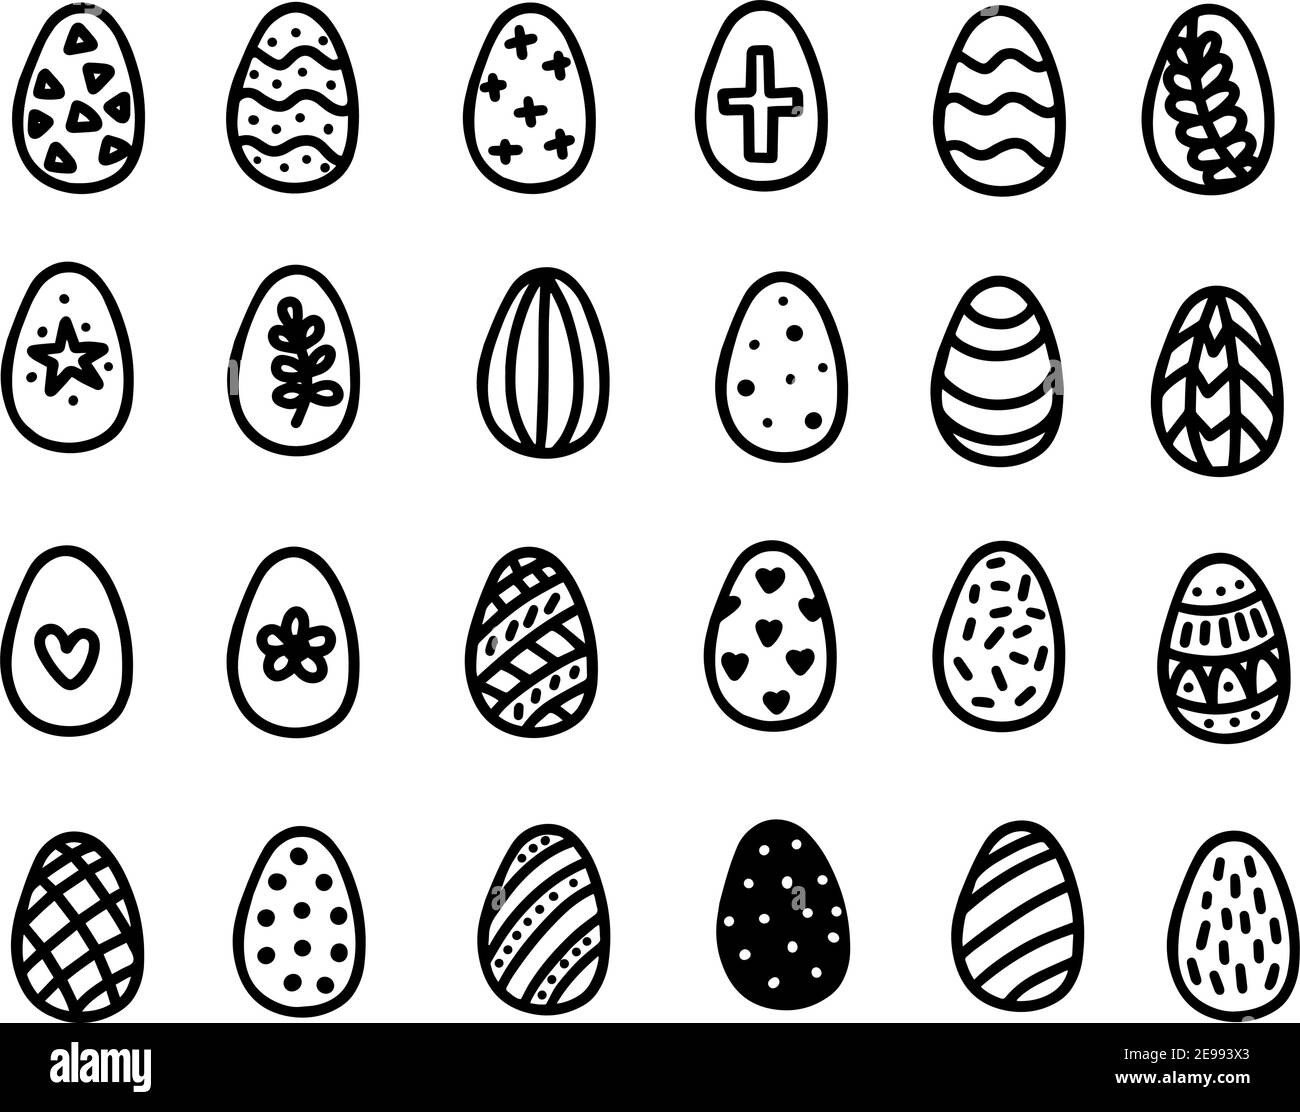 Easter eggs doodle set. Hand-drawn vector illustration. Decorated Easter egg icons. Stock Vector